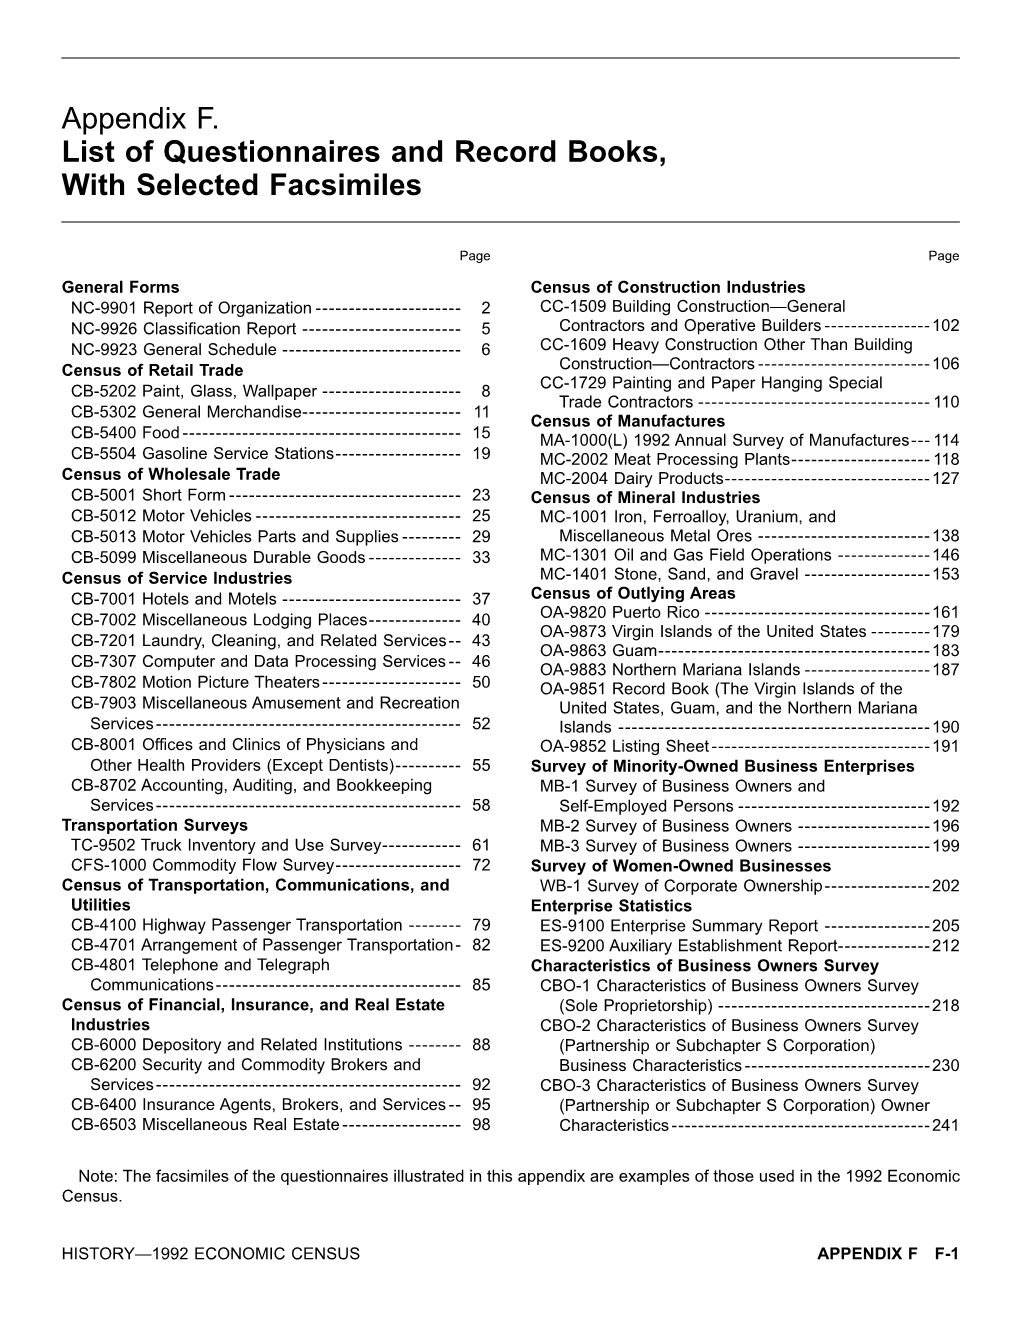 Appendix F. List of Questionnaires and Record Books, with Selected Facsimiles